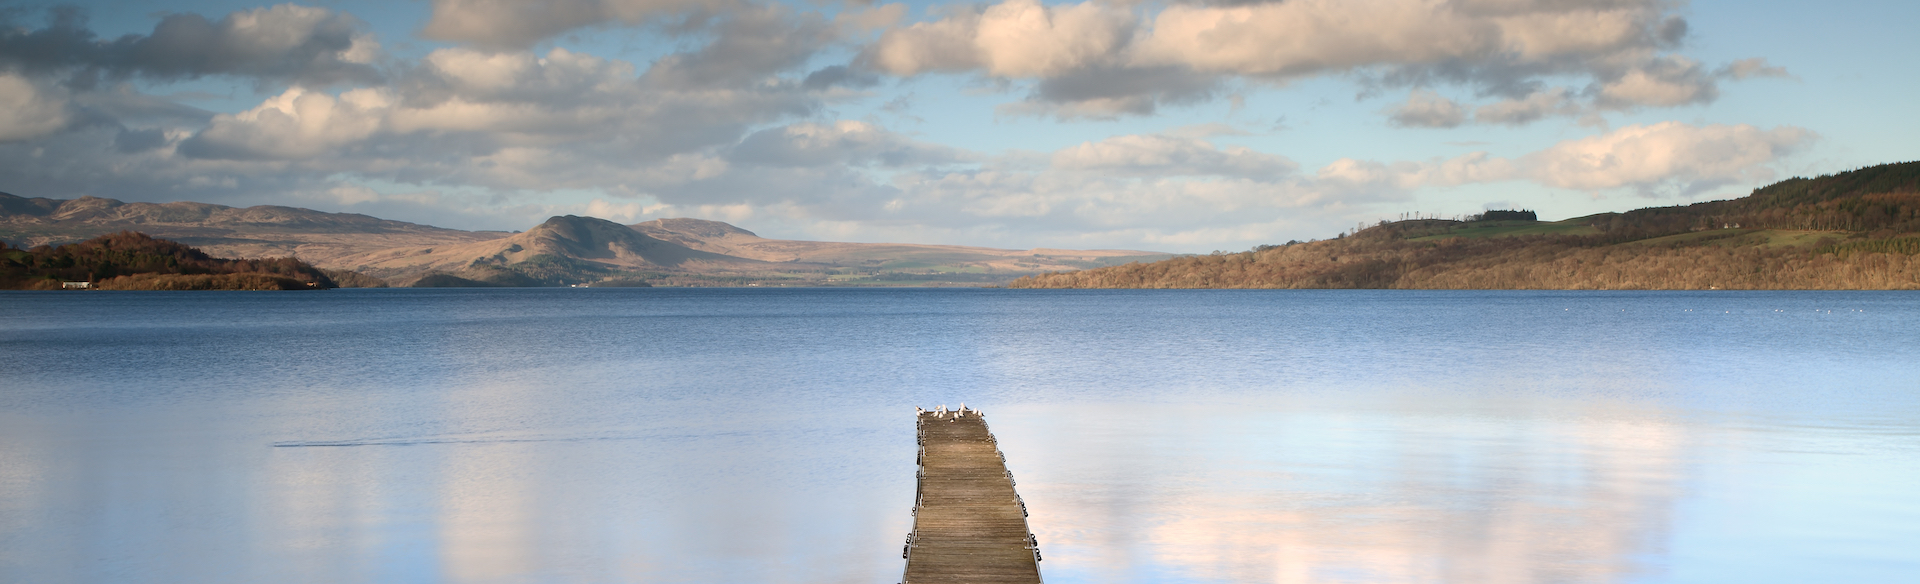 a pontoon stretching out into the still and blue waters of Loch Lomond with hills in the background